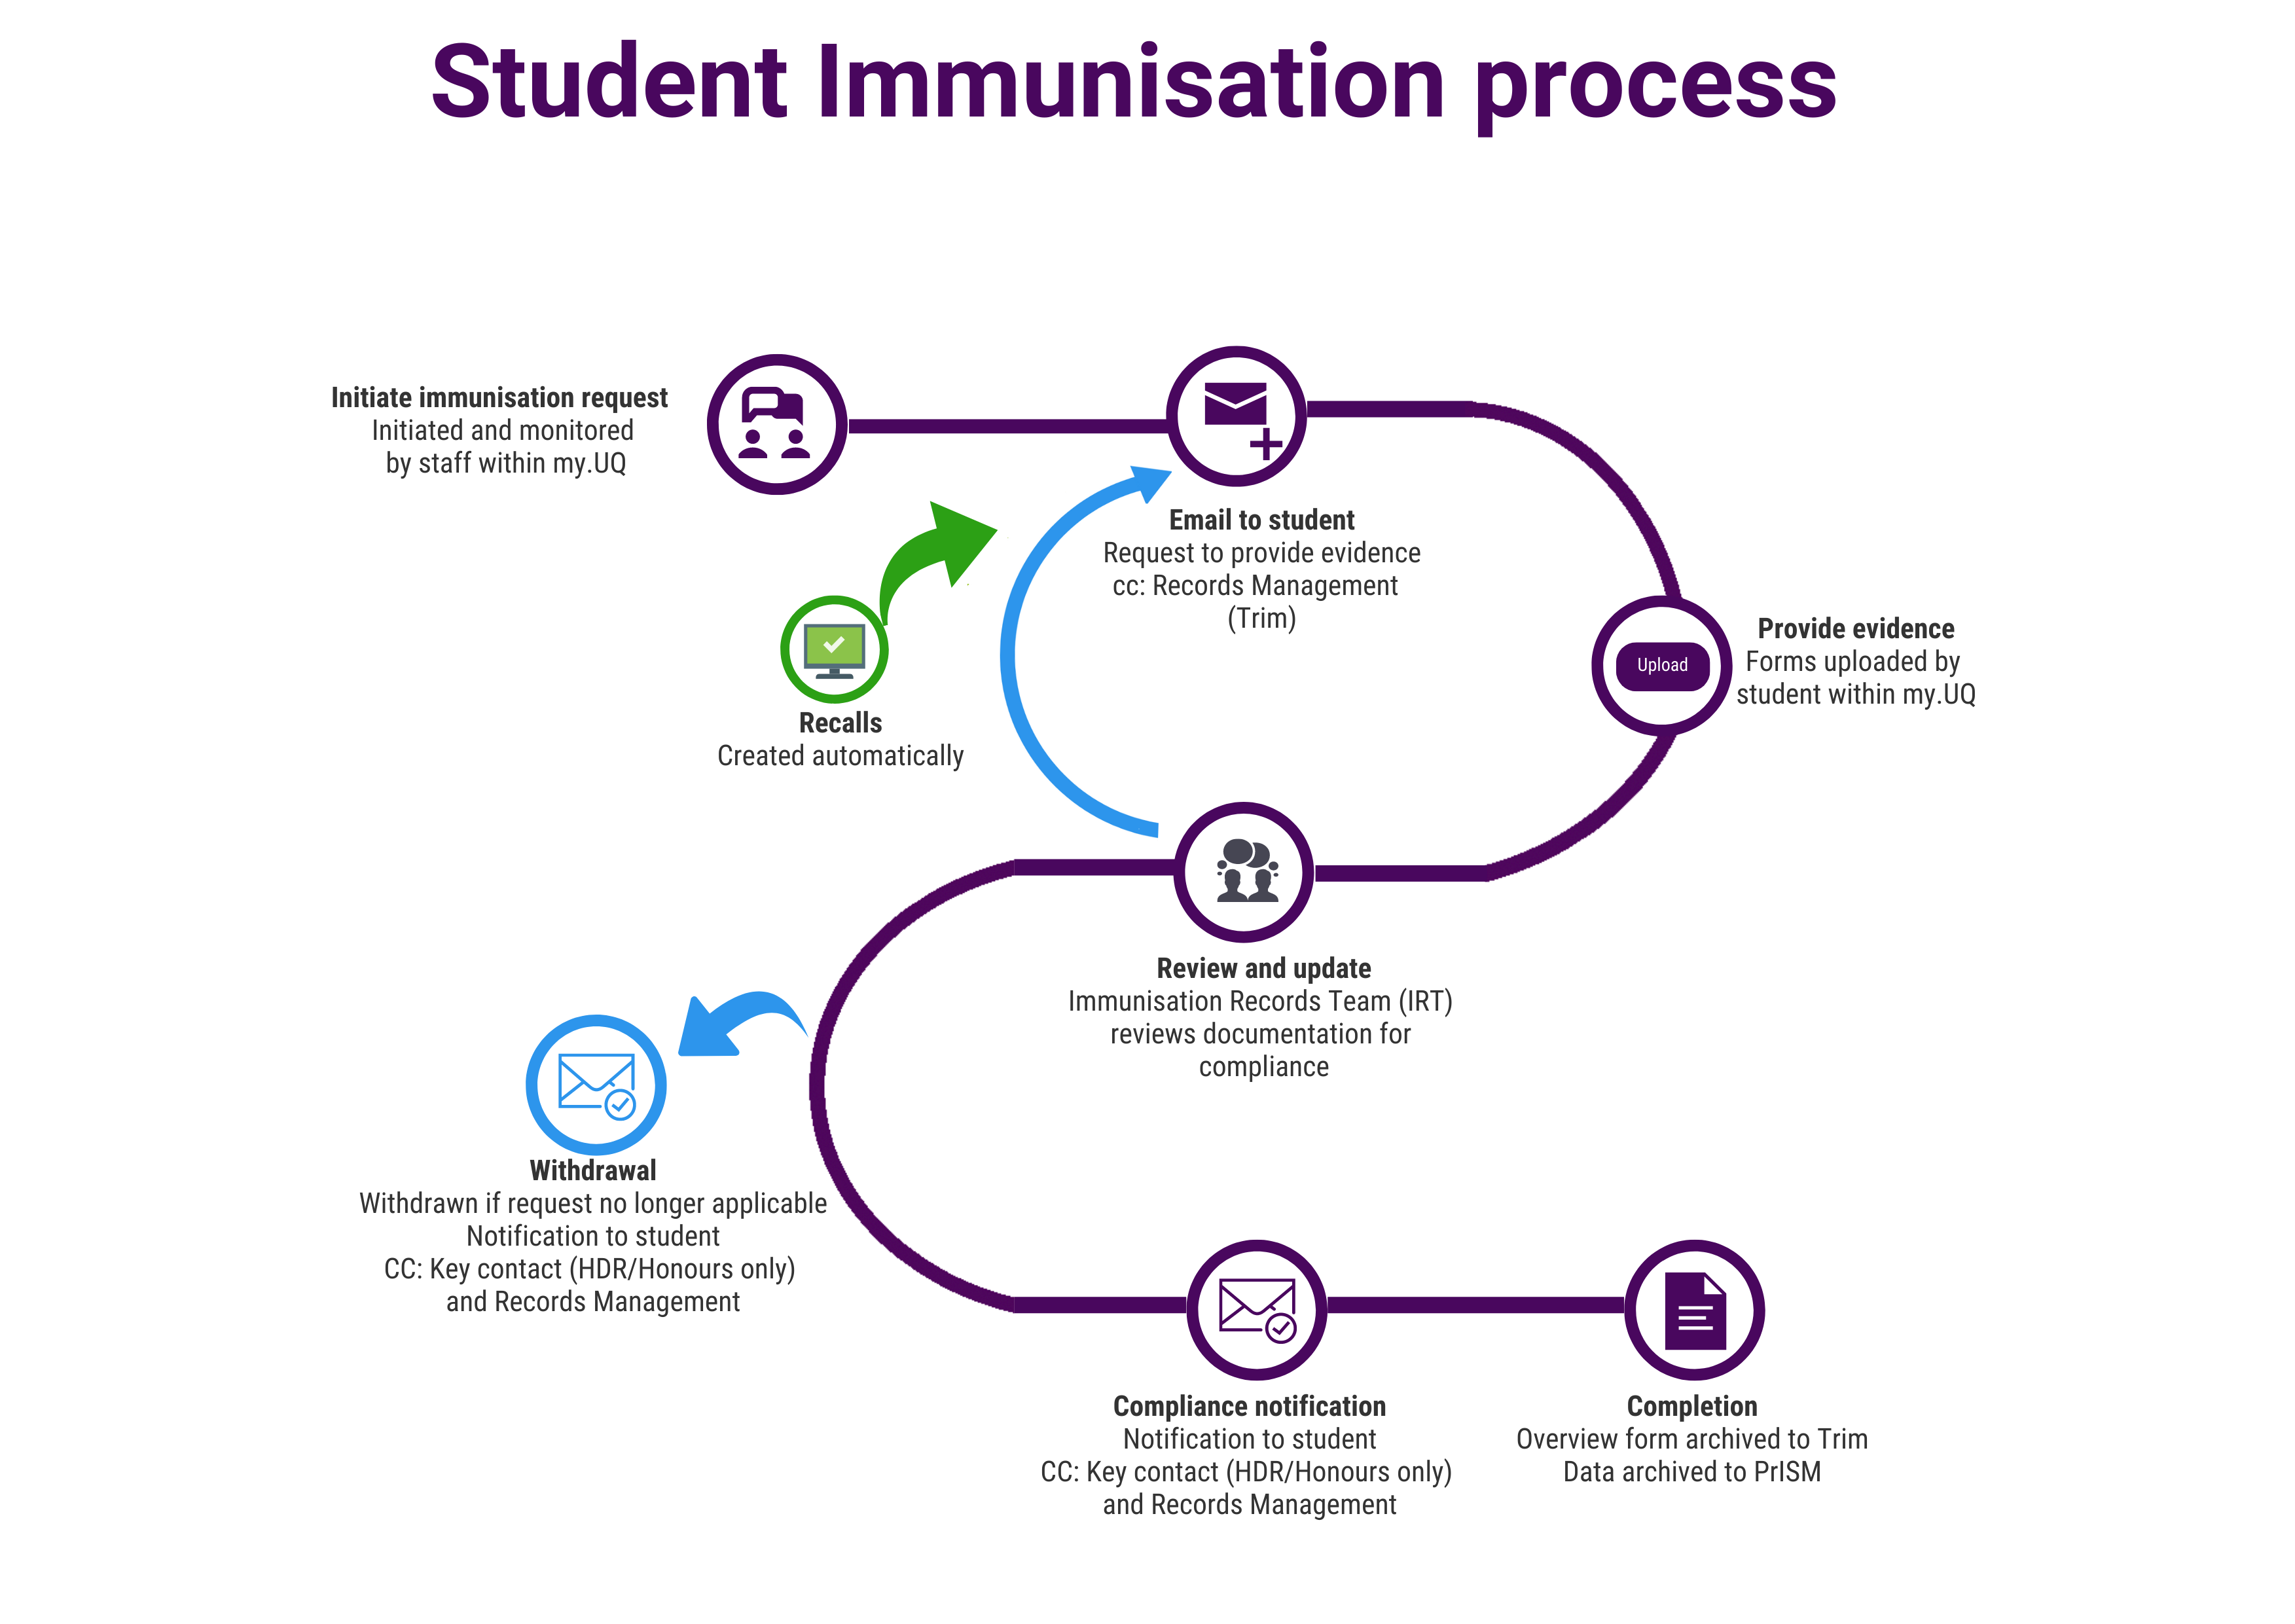 Process diagram of the Student Immunisation Evidence Process